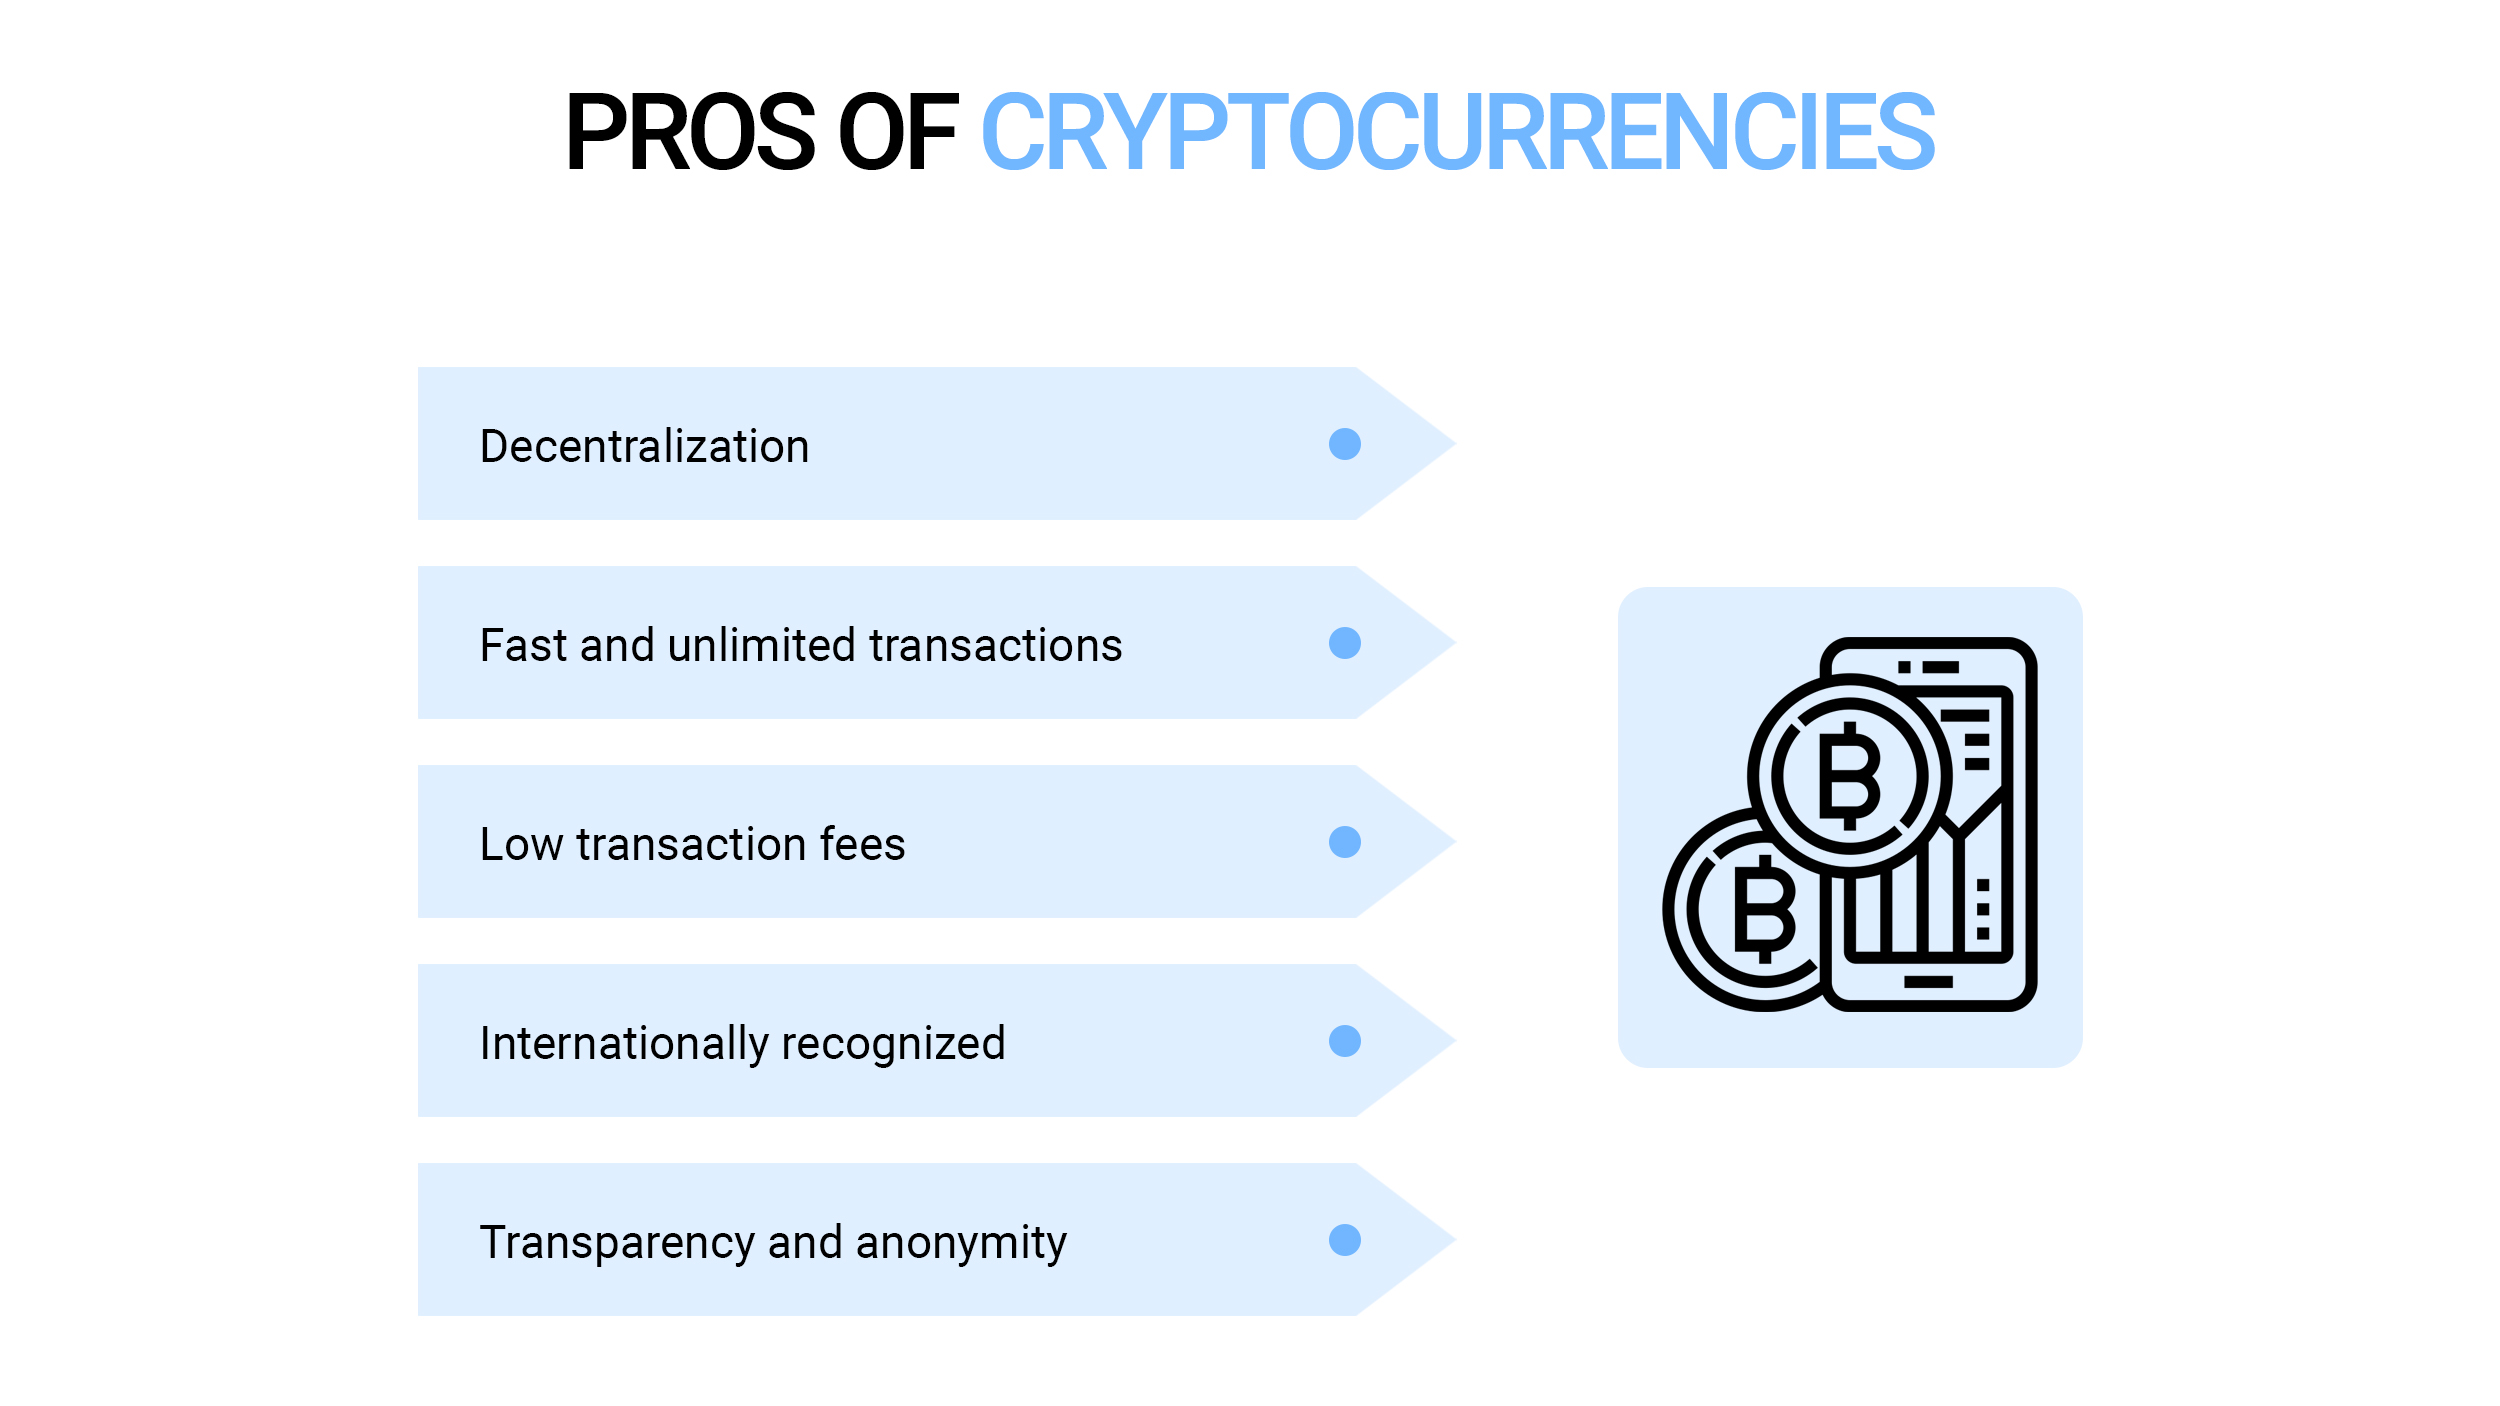 Pros of cryptocurrencies